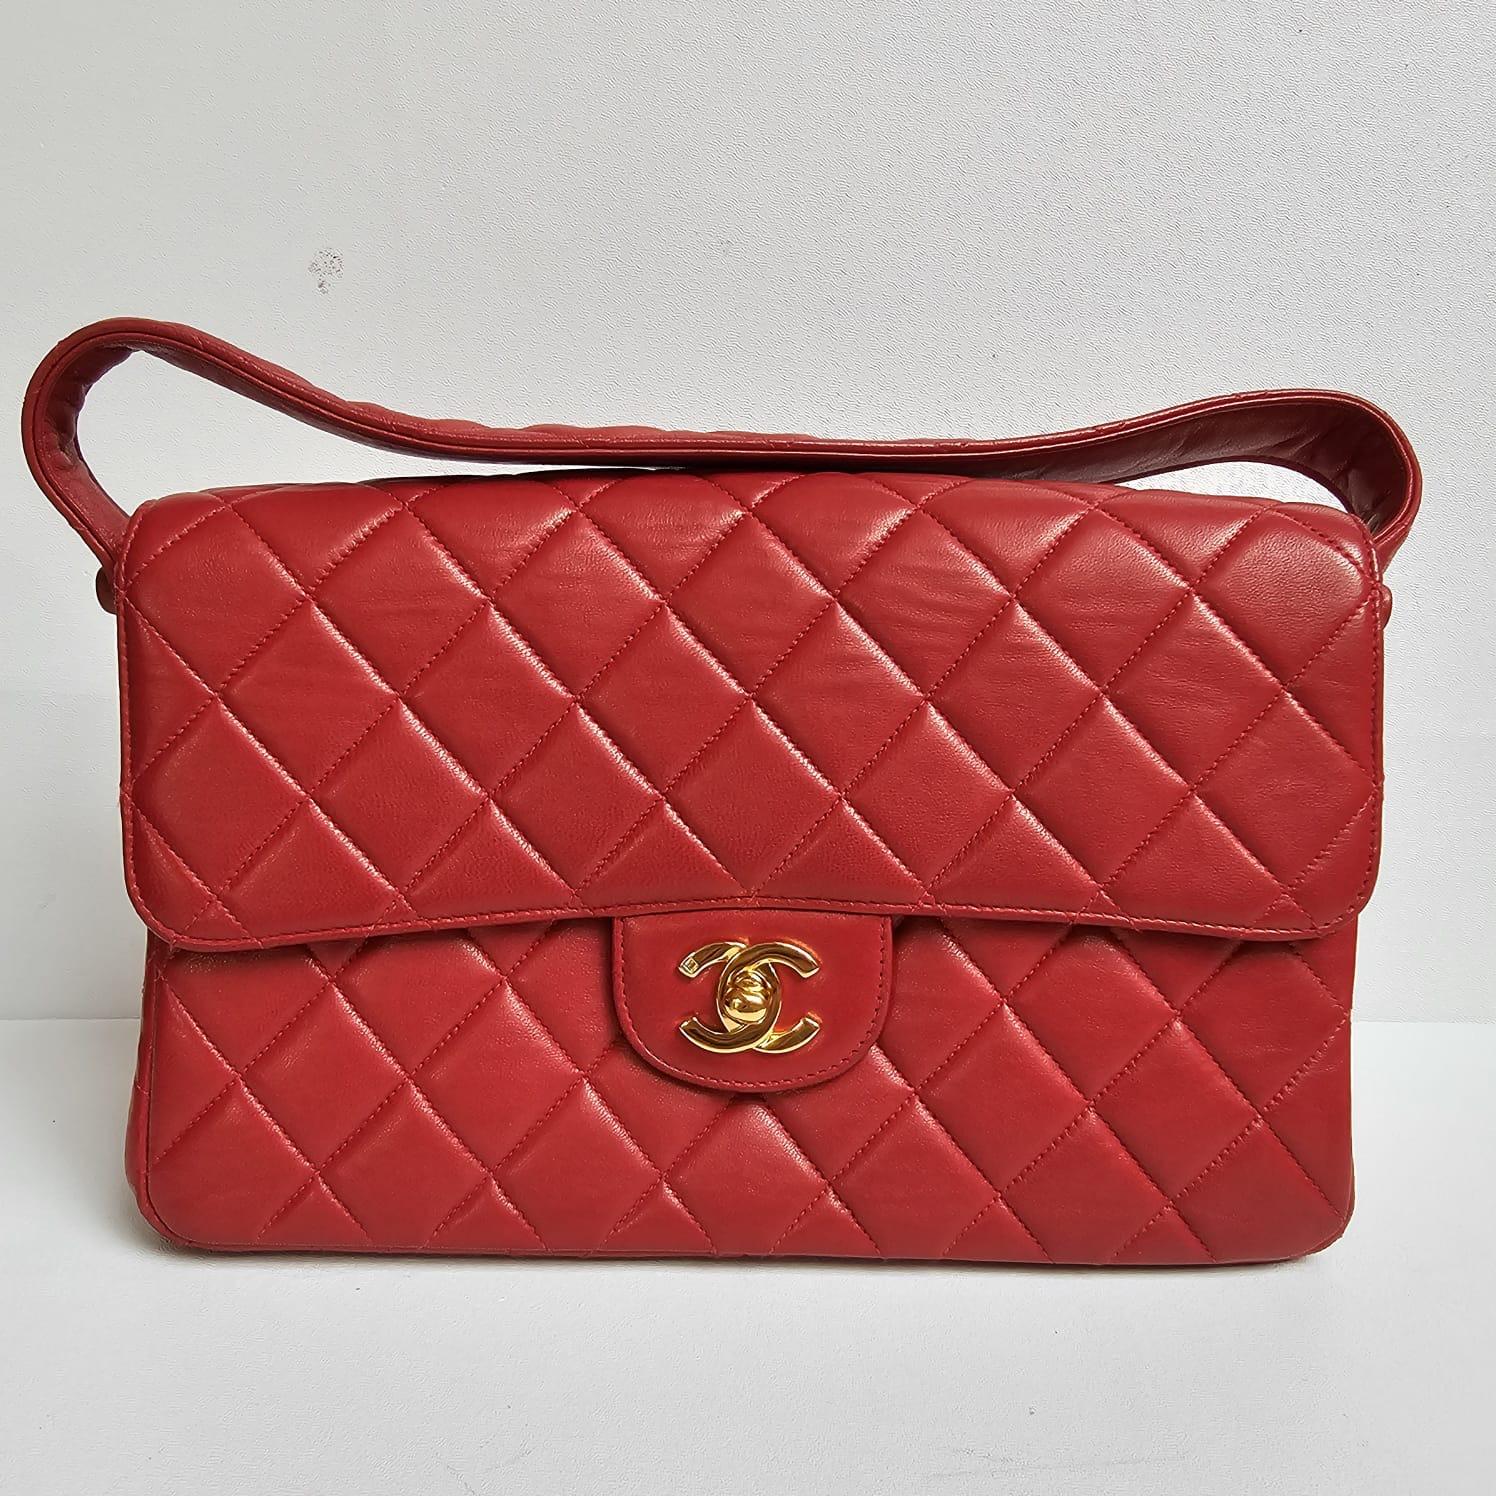 Vintage chanel biface top handle in red lambskin leather. Overall in original and good condition with light wrinkling on the top of the flap as seen on pictures. Faint rubbing on the bottom corners and scratching on the lining. Comes with its holo